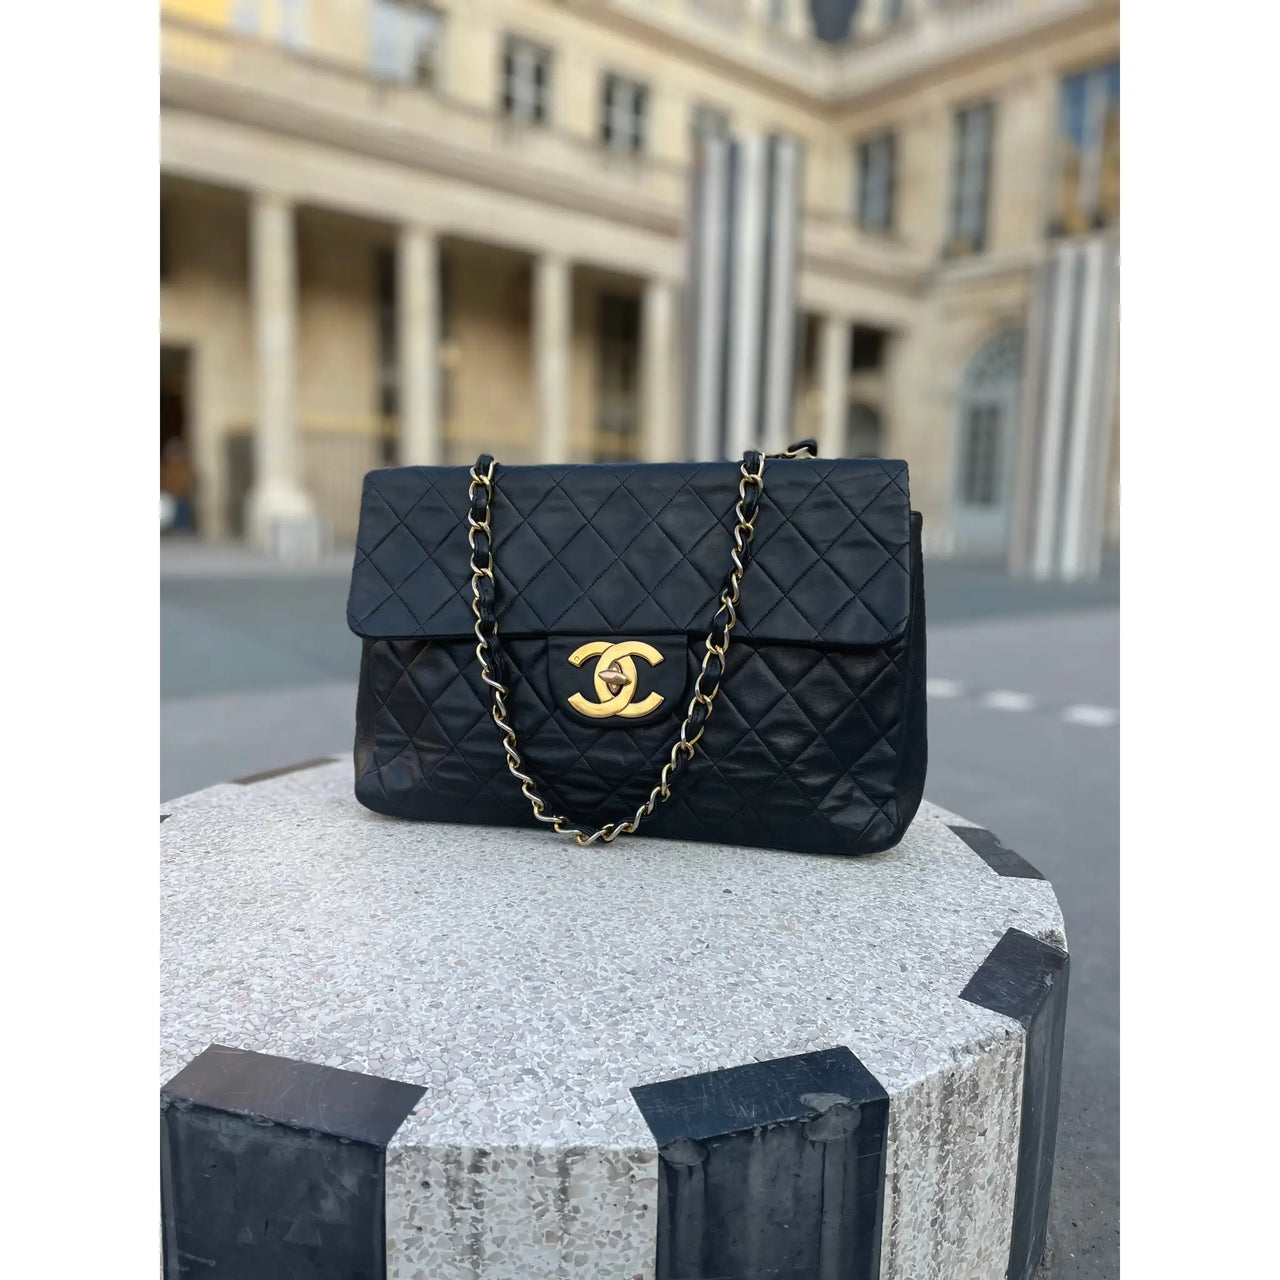 CHANEL Black Lambskin Quilted Leather 24K Gold Plated Shoulder Maxi/Jumbo Flap